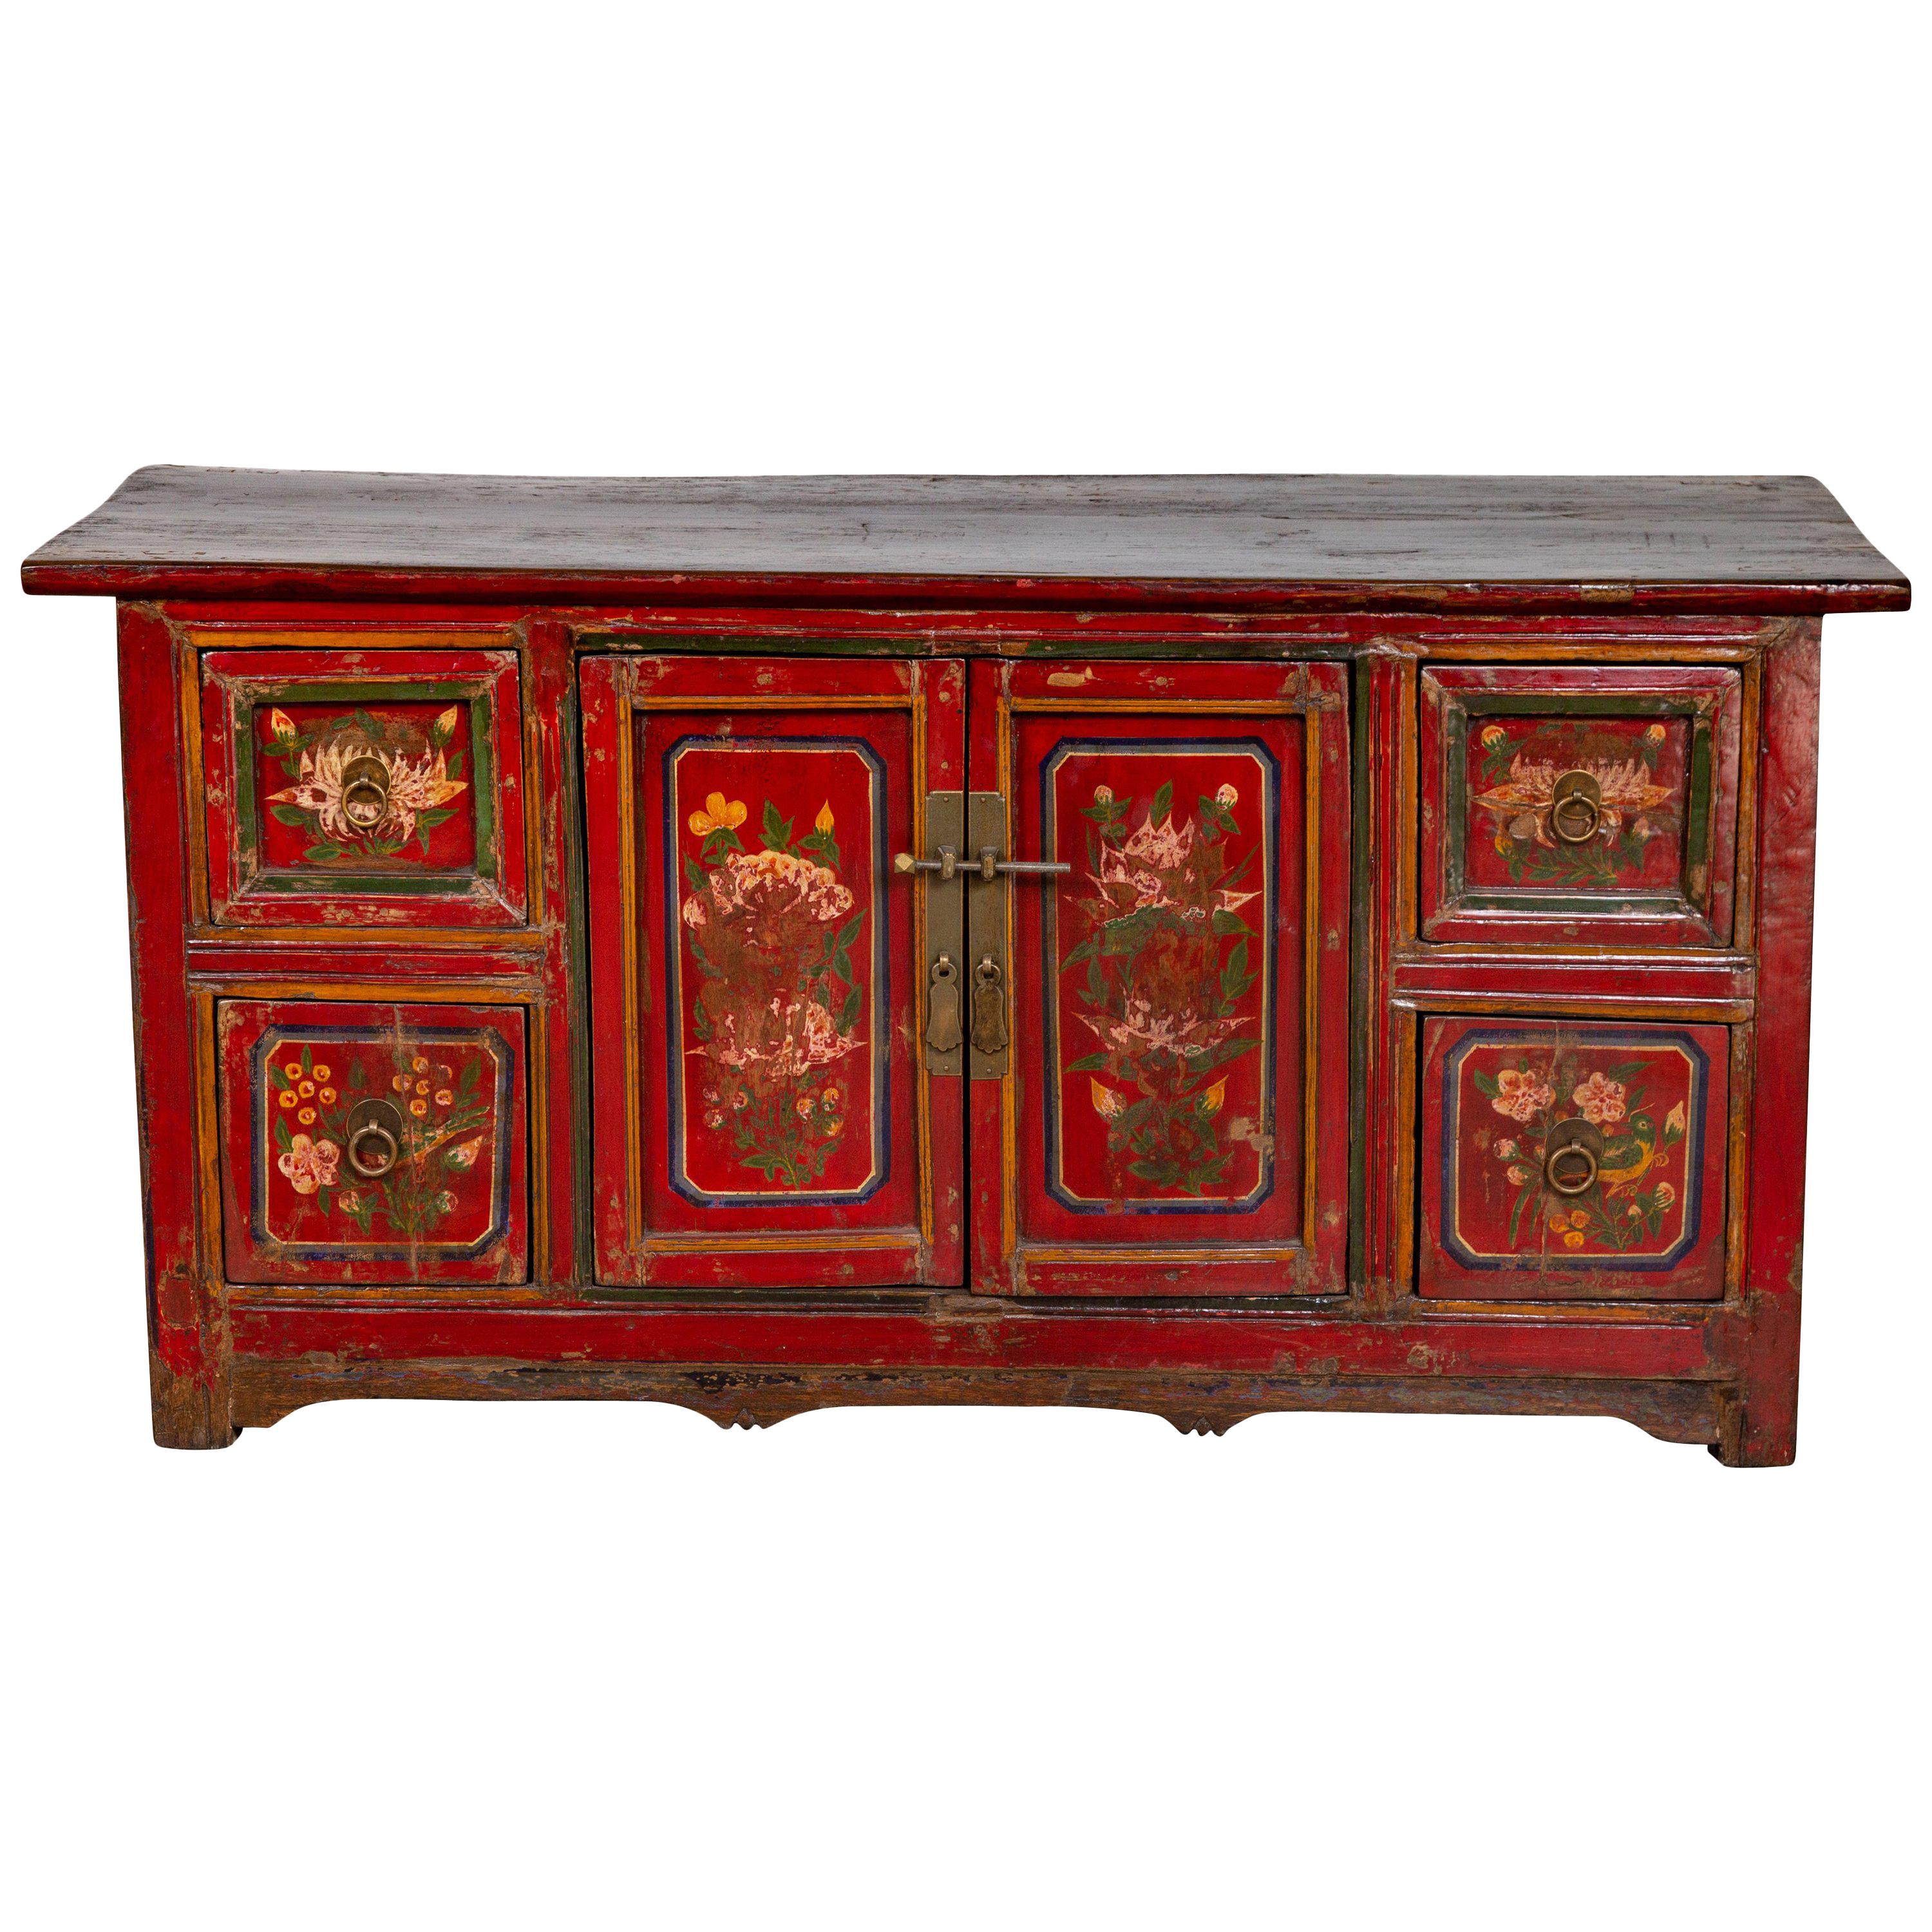 Mongolian Red Lacquered Cabinet with Hand Painted Floral Décor, circa 1900